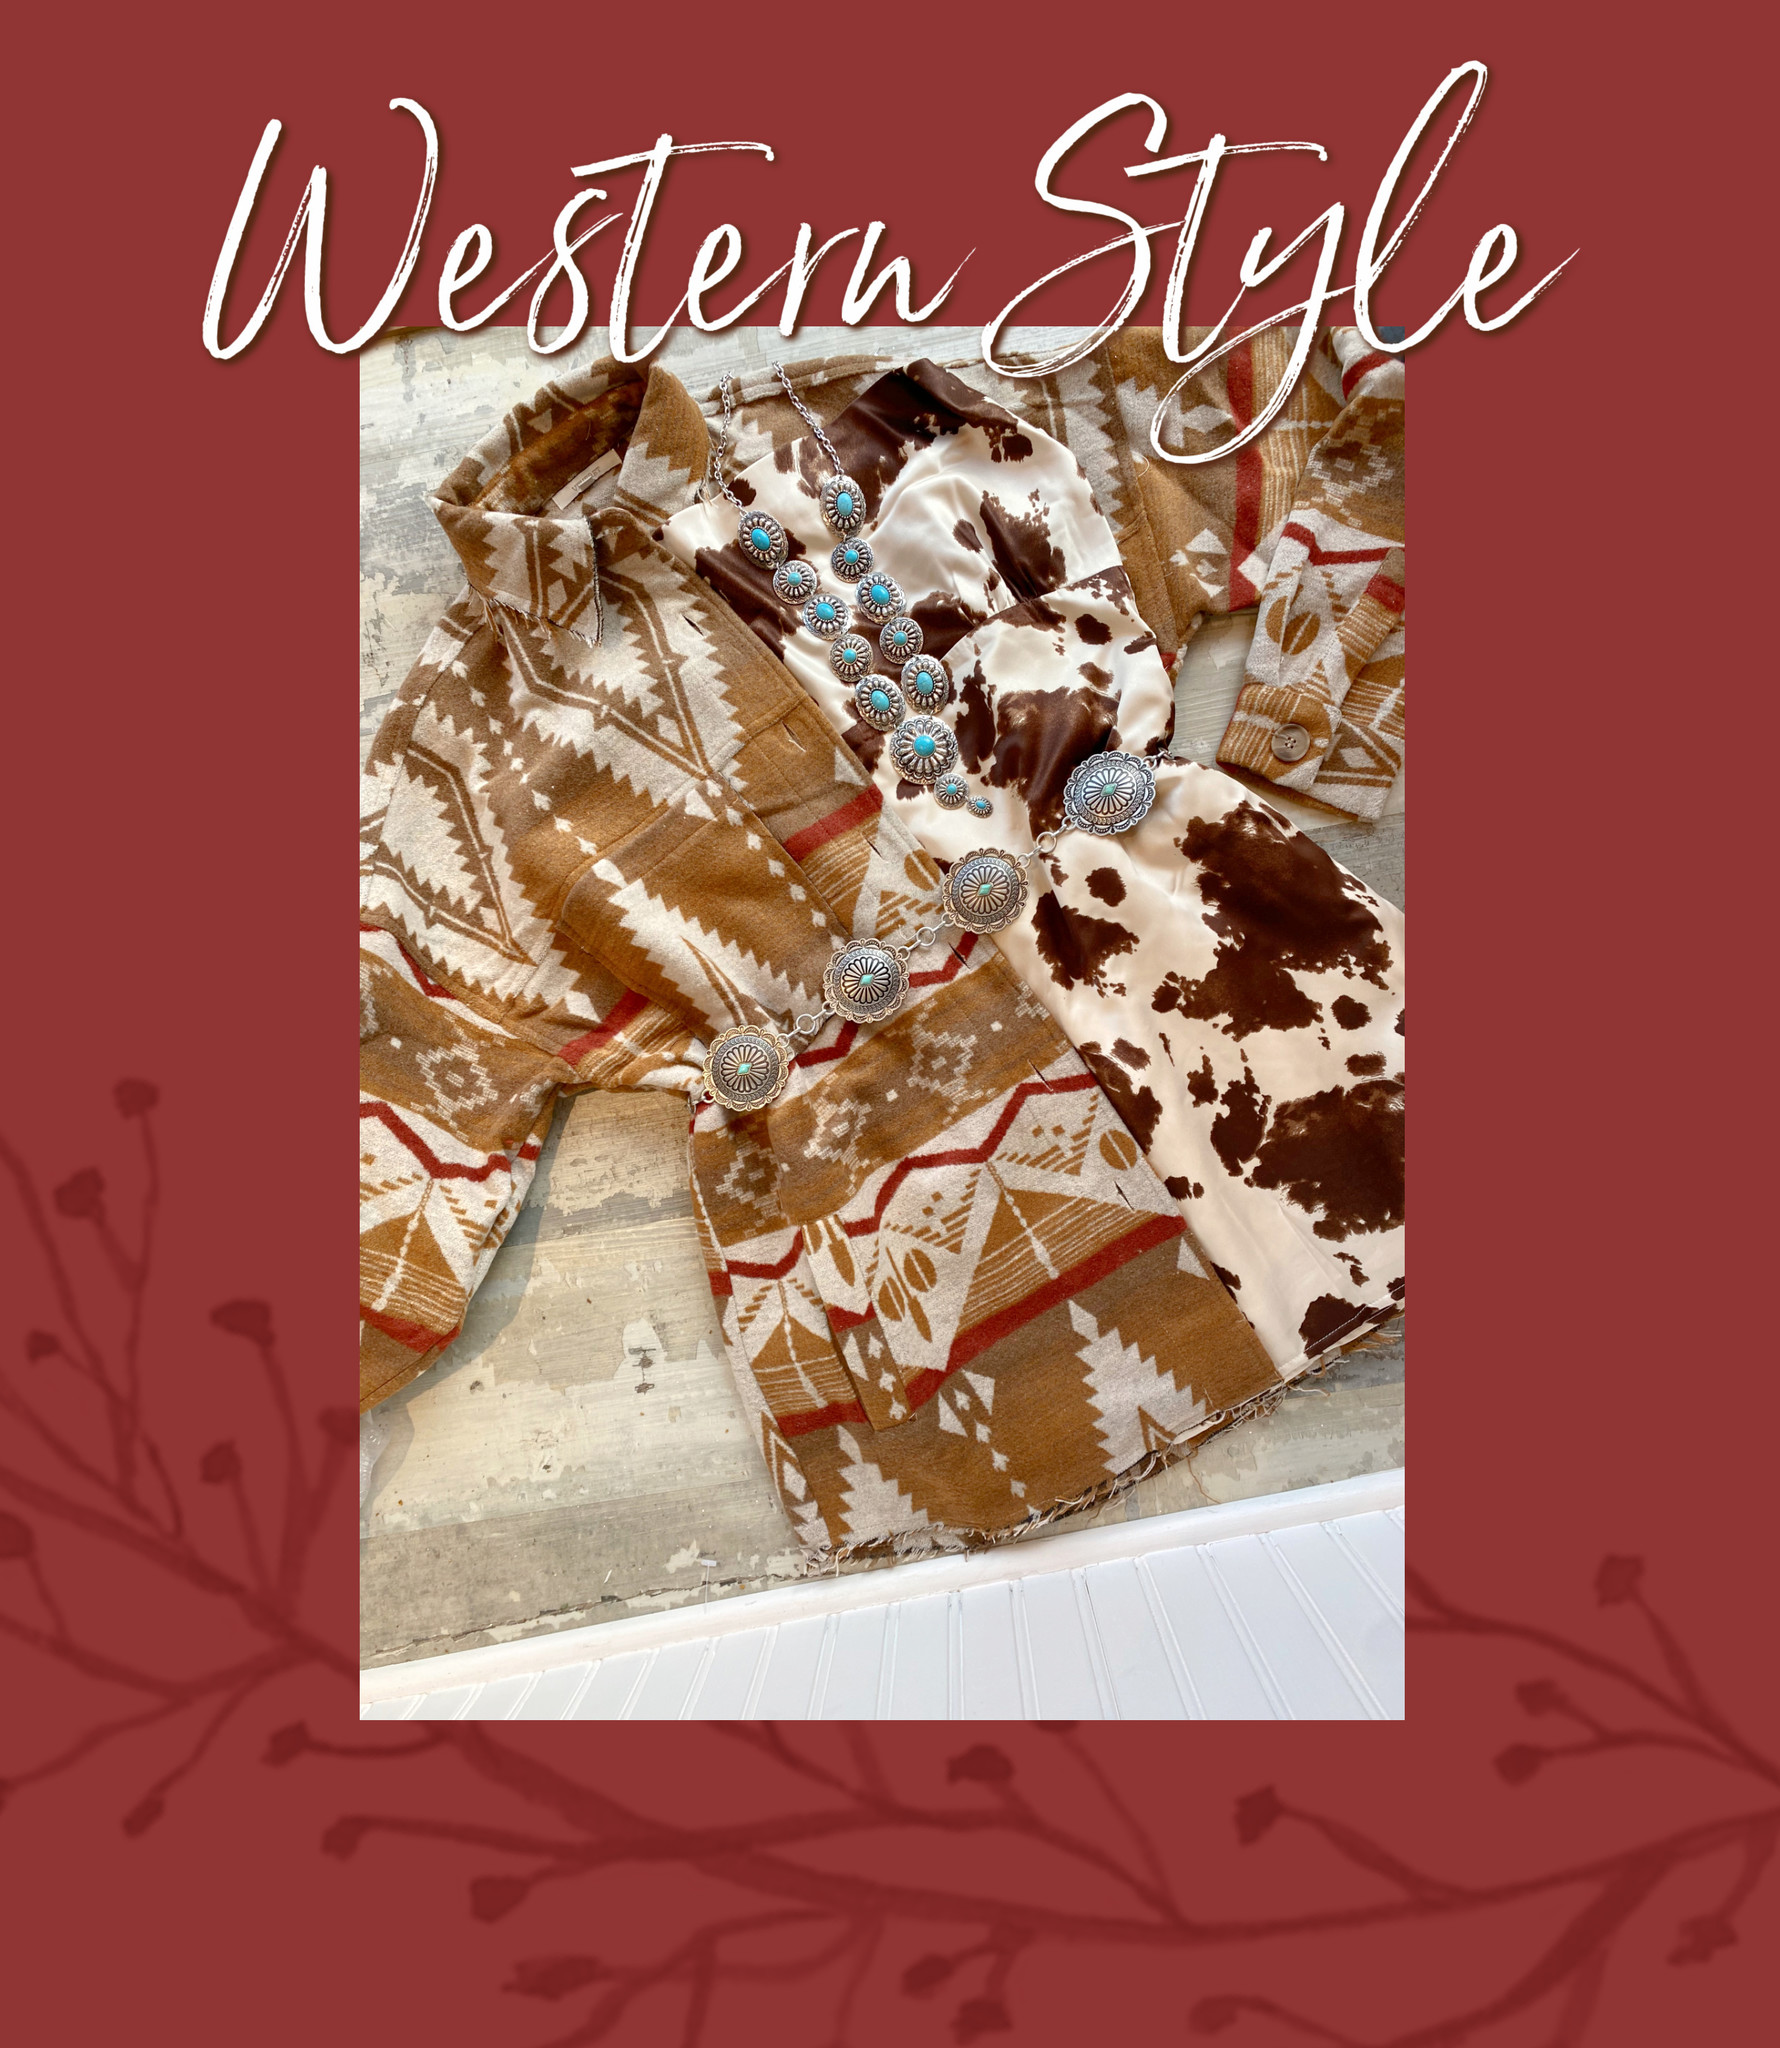 Western style encapsulates so many things. In this picture we have featured our brown and white cow print rodeo dress, a western printed tan, white, and orange shacket, and two statement turquoise jewelry pieces.